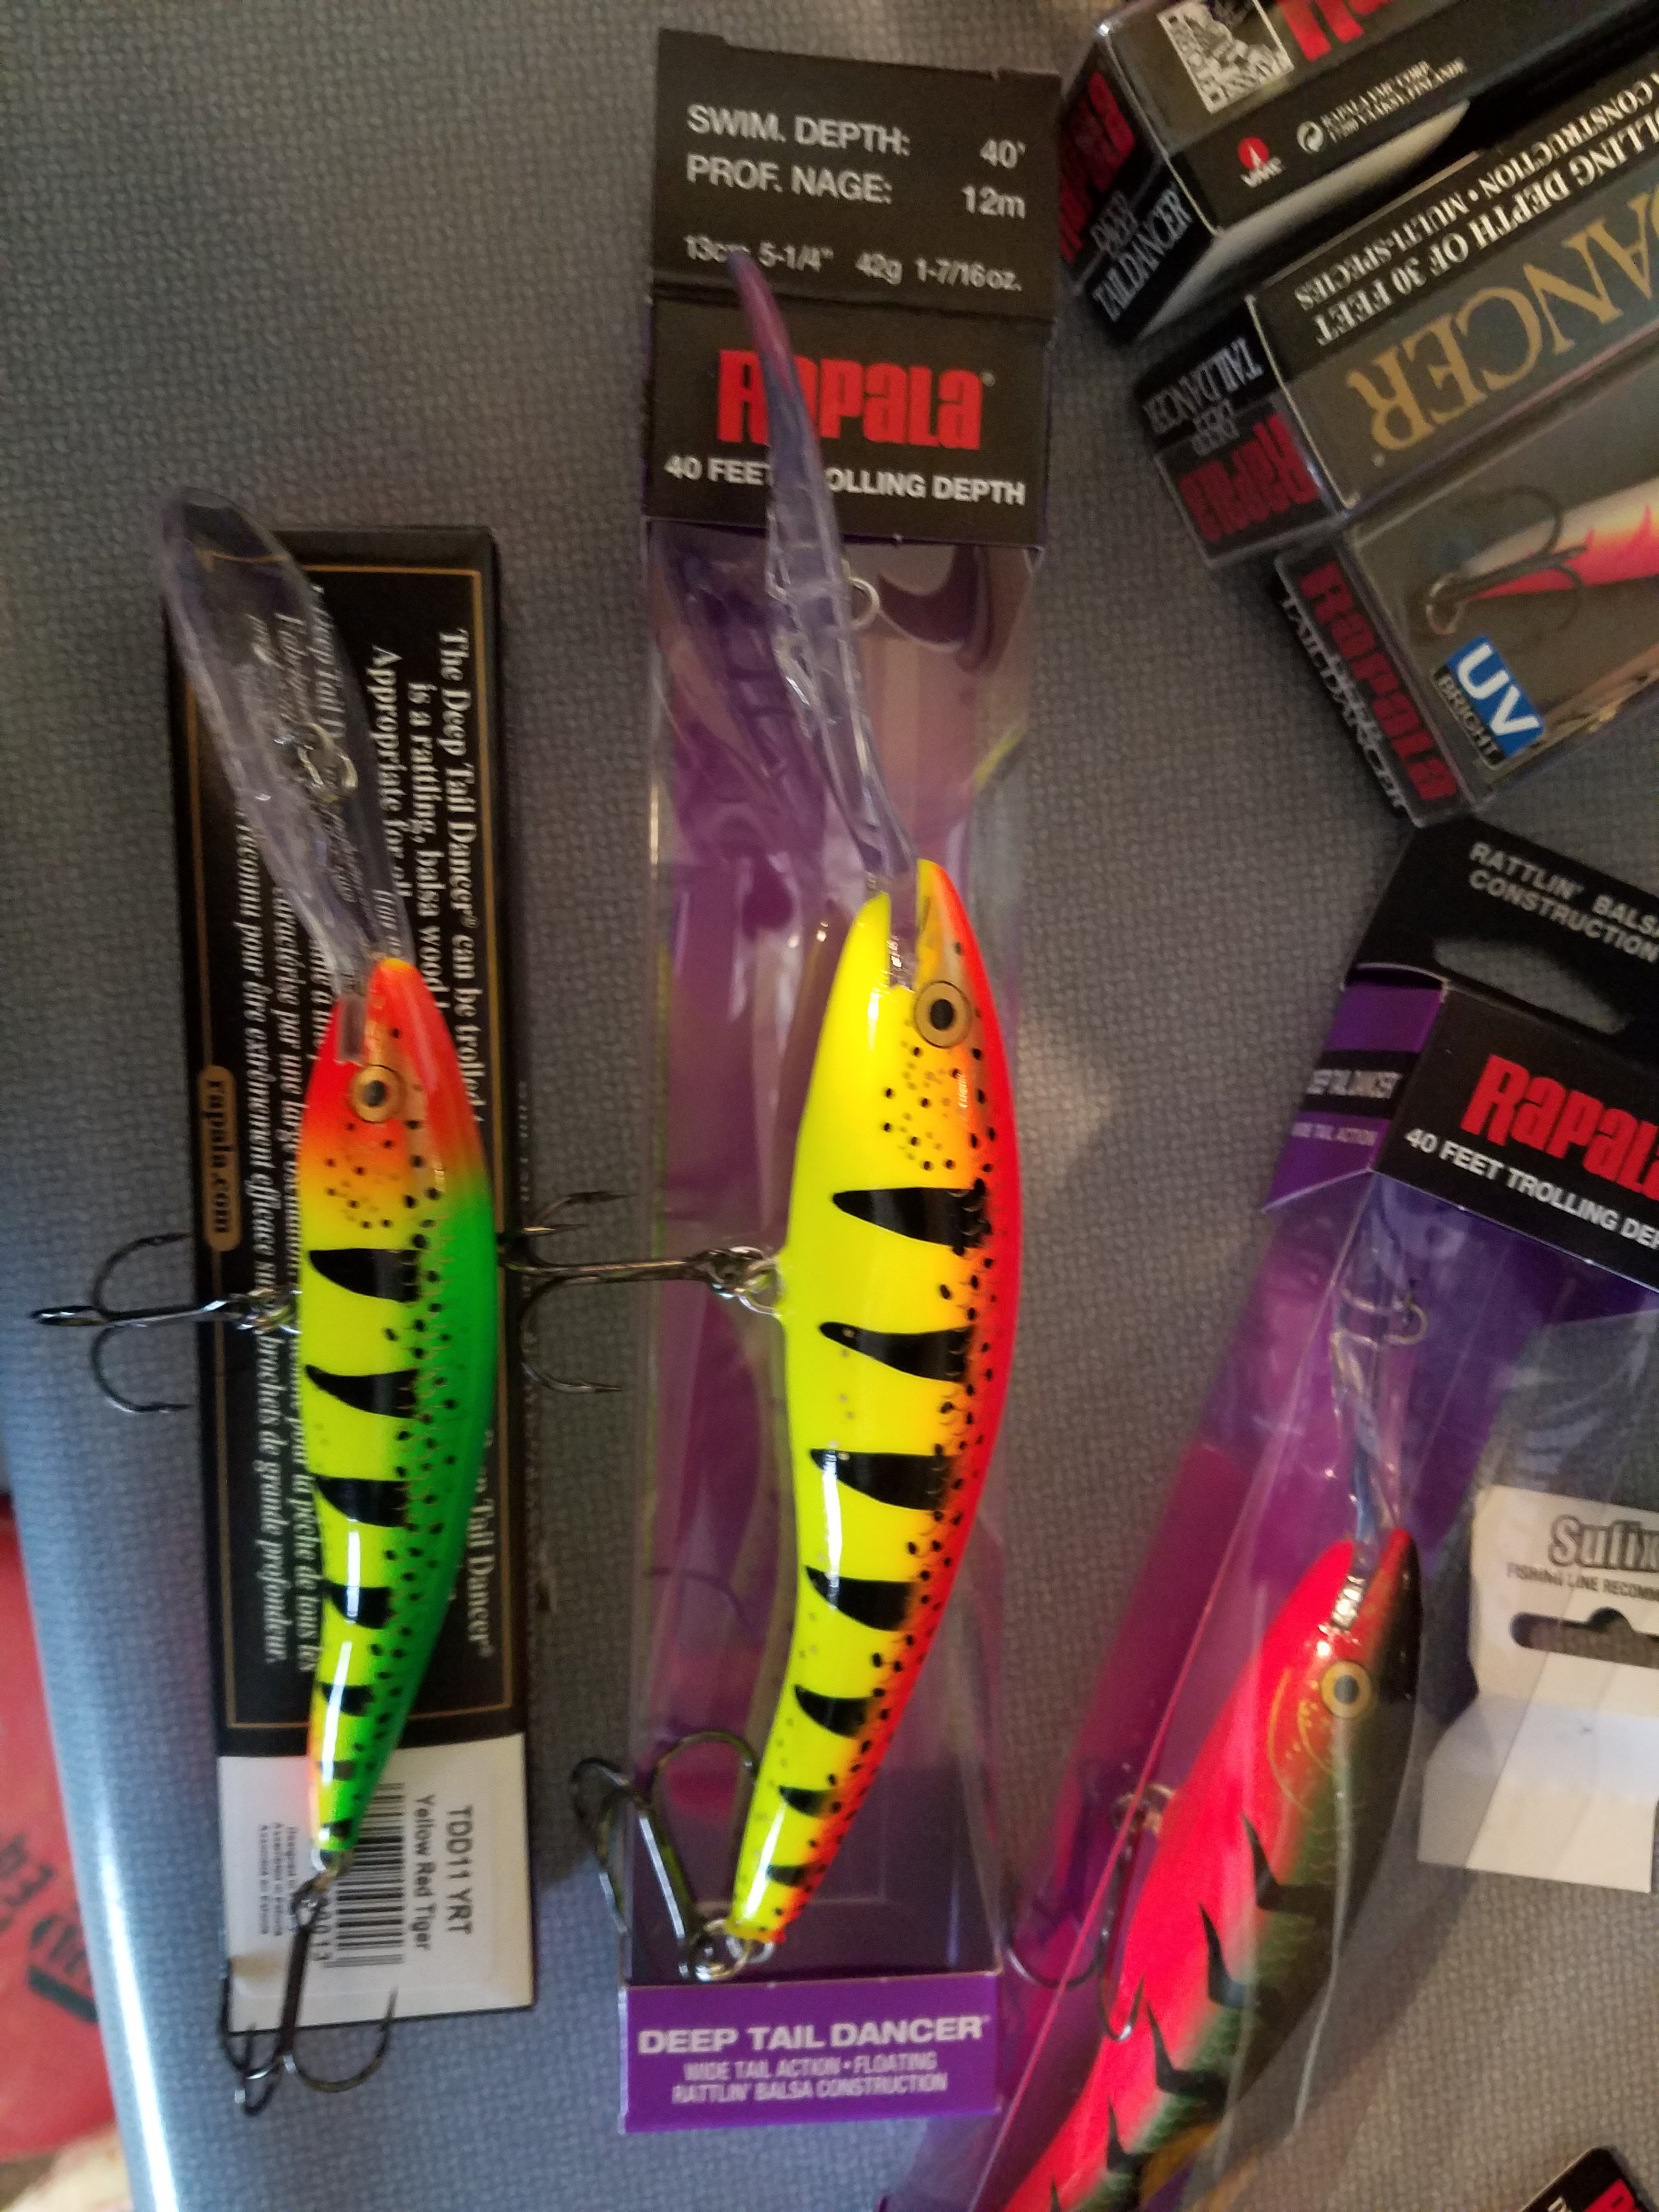 Rapala Deep Tail Dancer 13 - General Discussion Forum - General